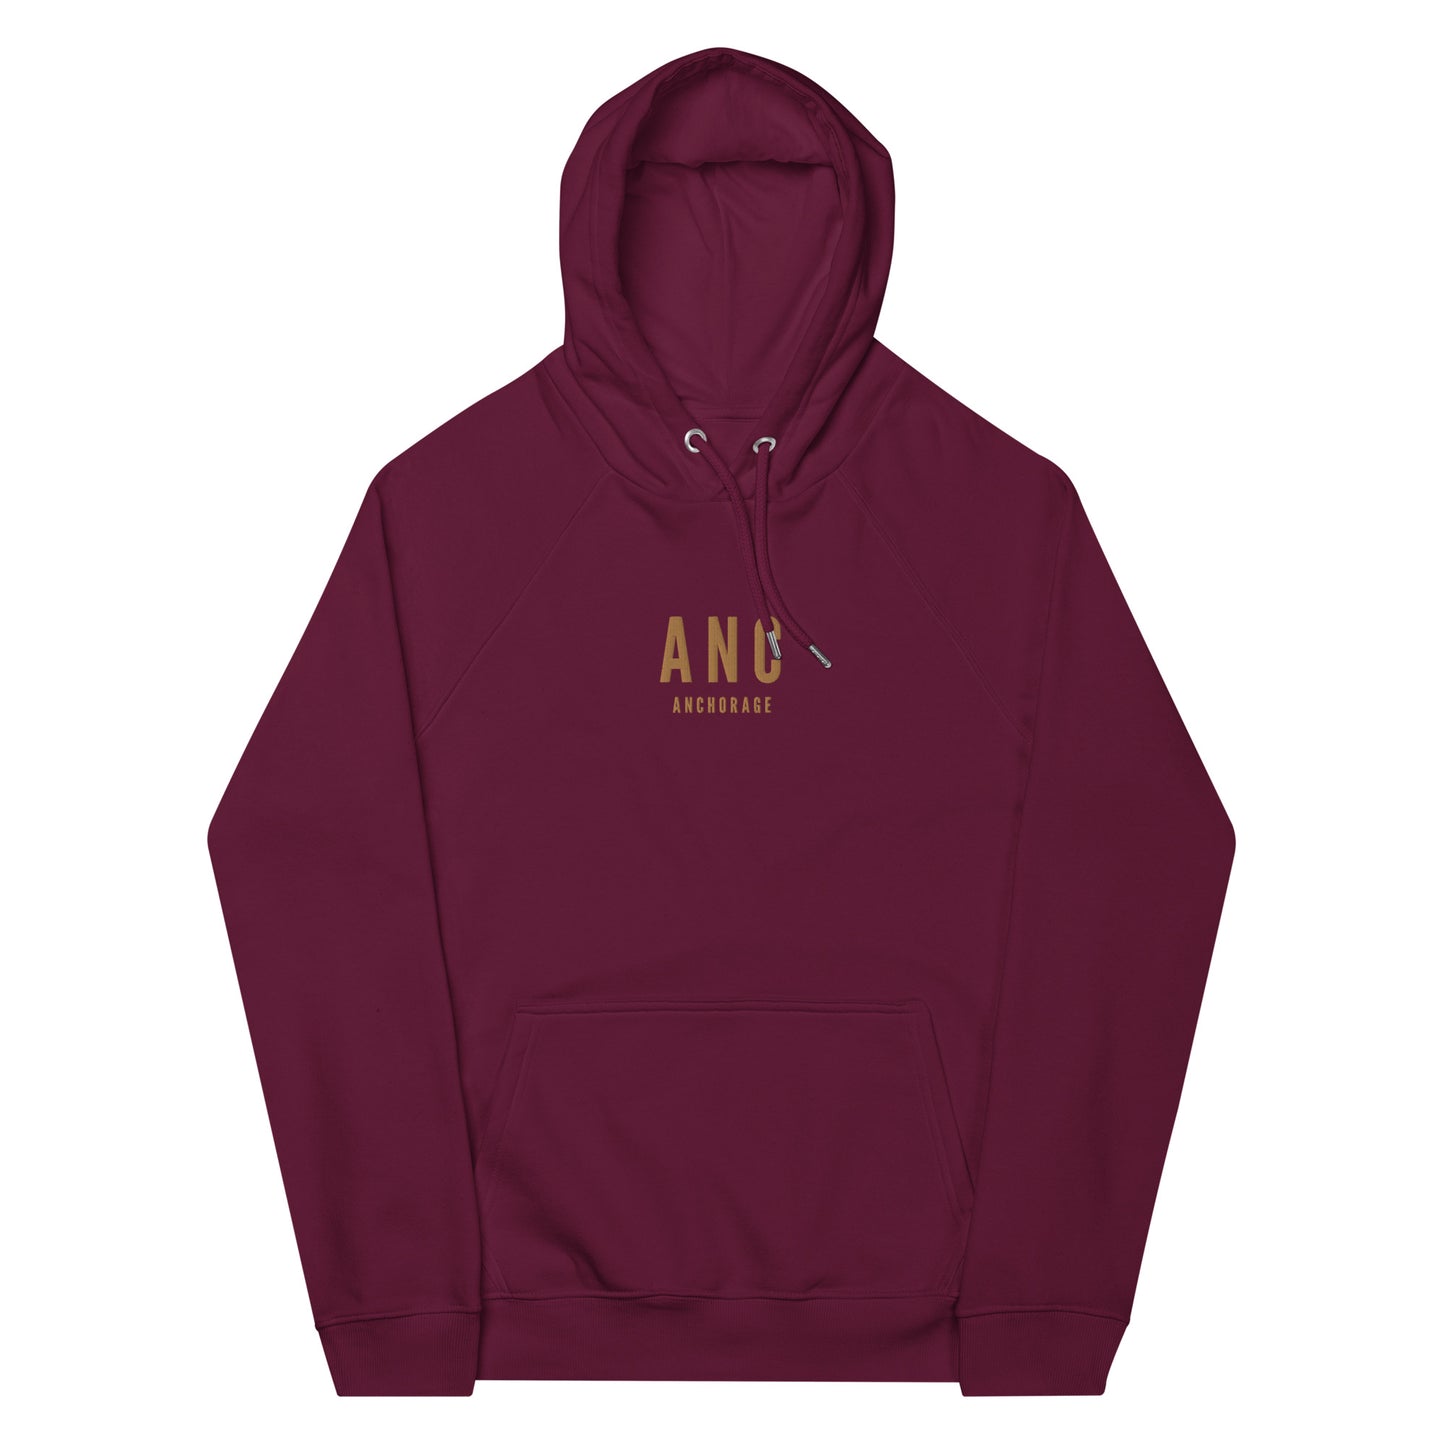 City Organic Hoodie - Old Gold • ANC Anchorage • YHM Designs - Image 11